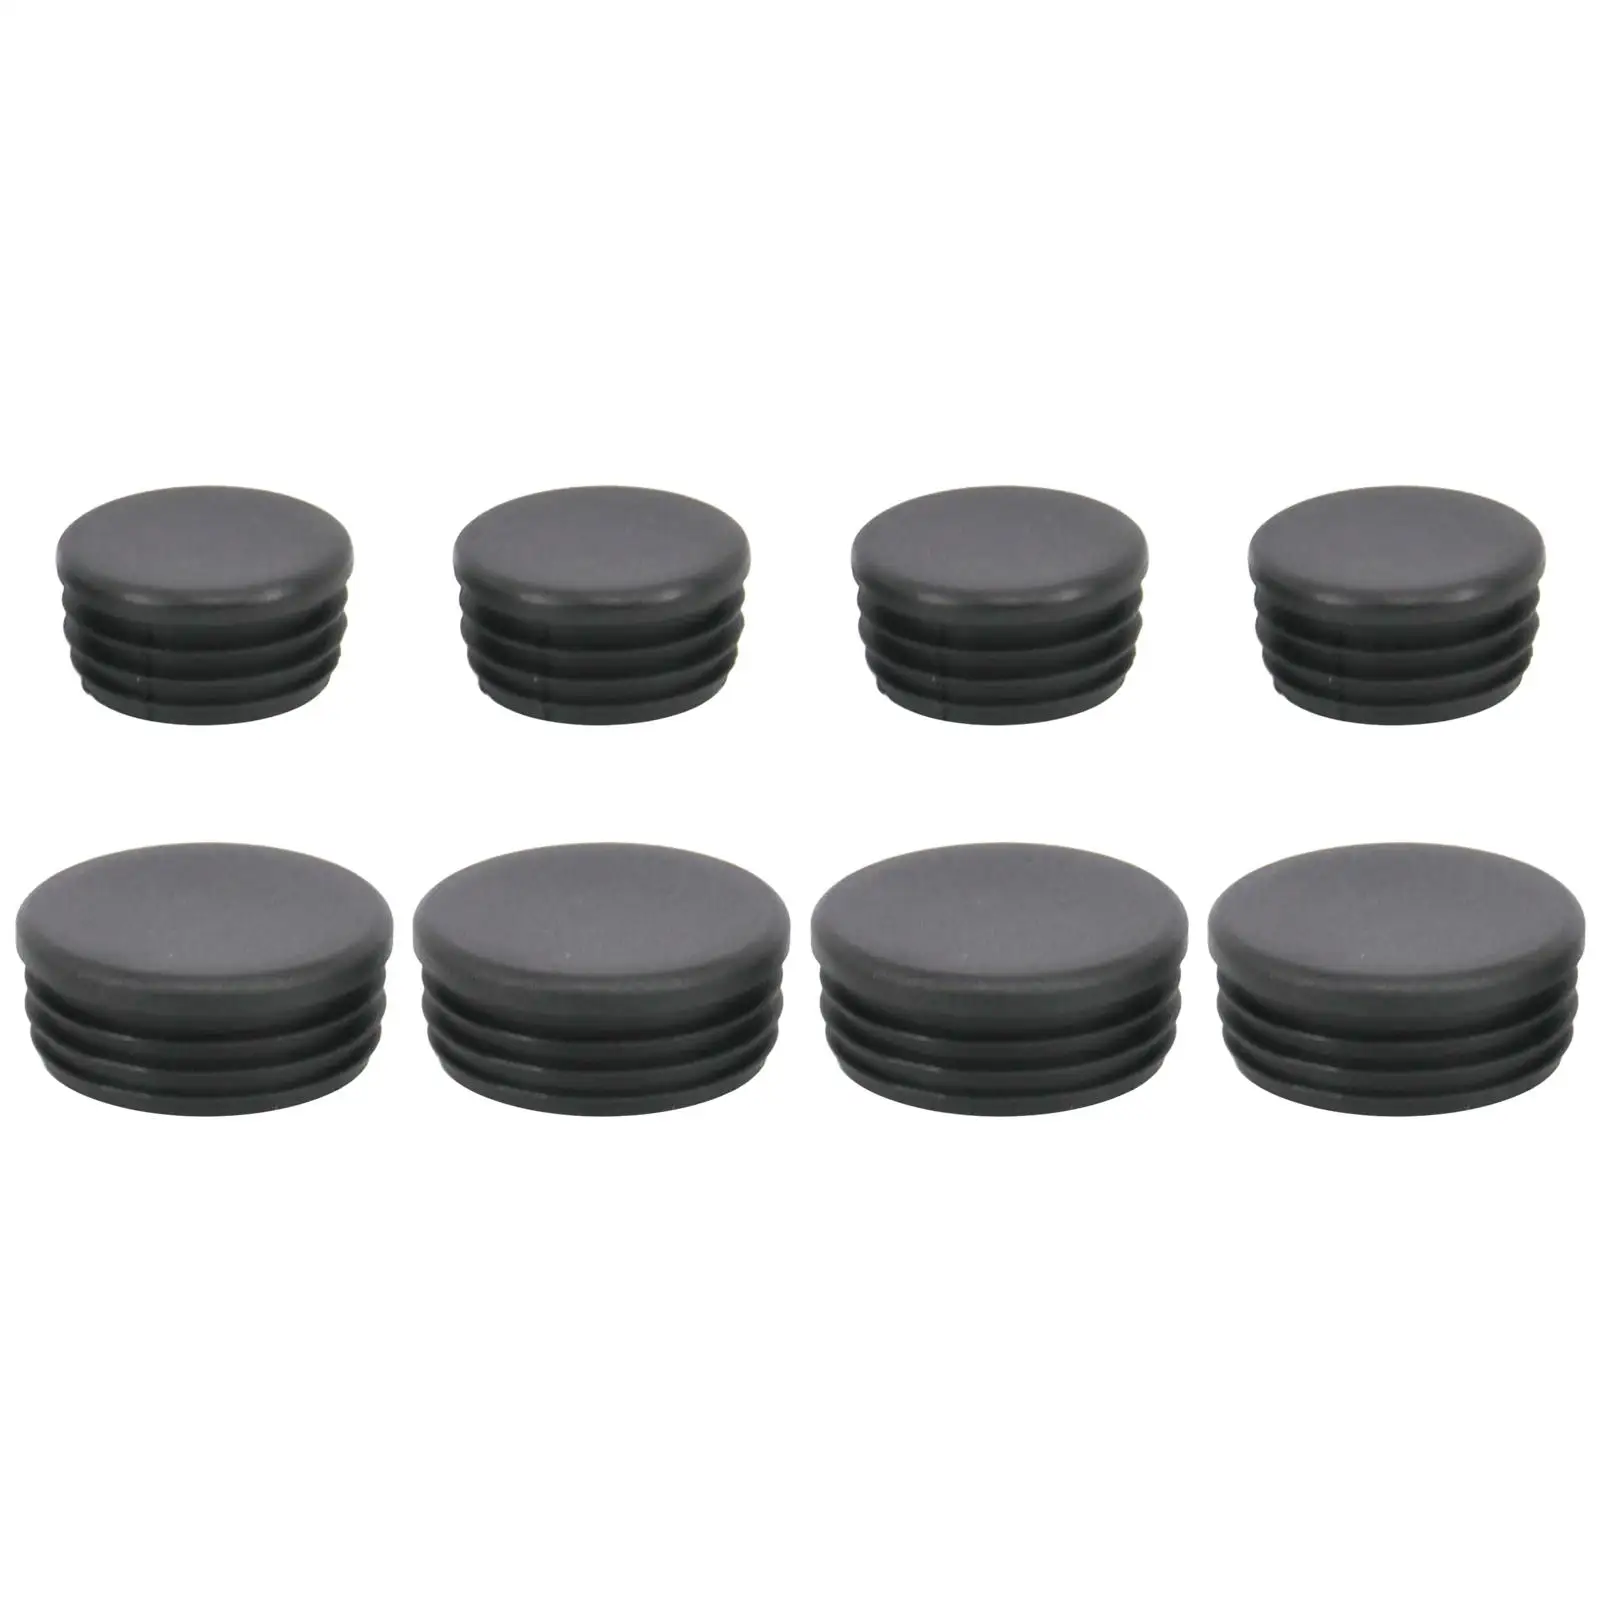 8 Pieces Waterproof Chassis Plug Covers Snowproof Car Supplies Modified Protection Covers for Suzuki Jimny Jb64 Jb74 18-Up